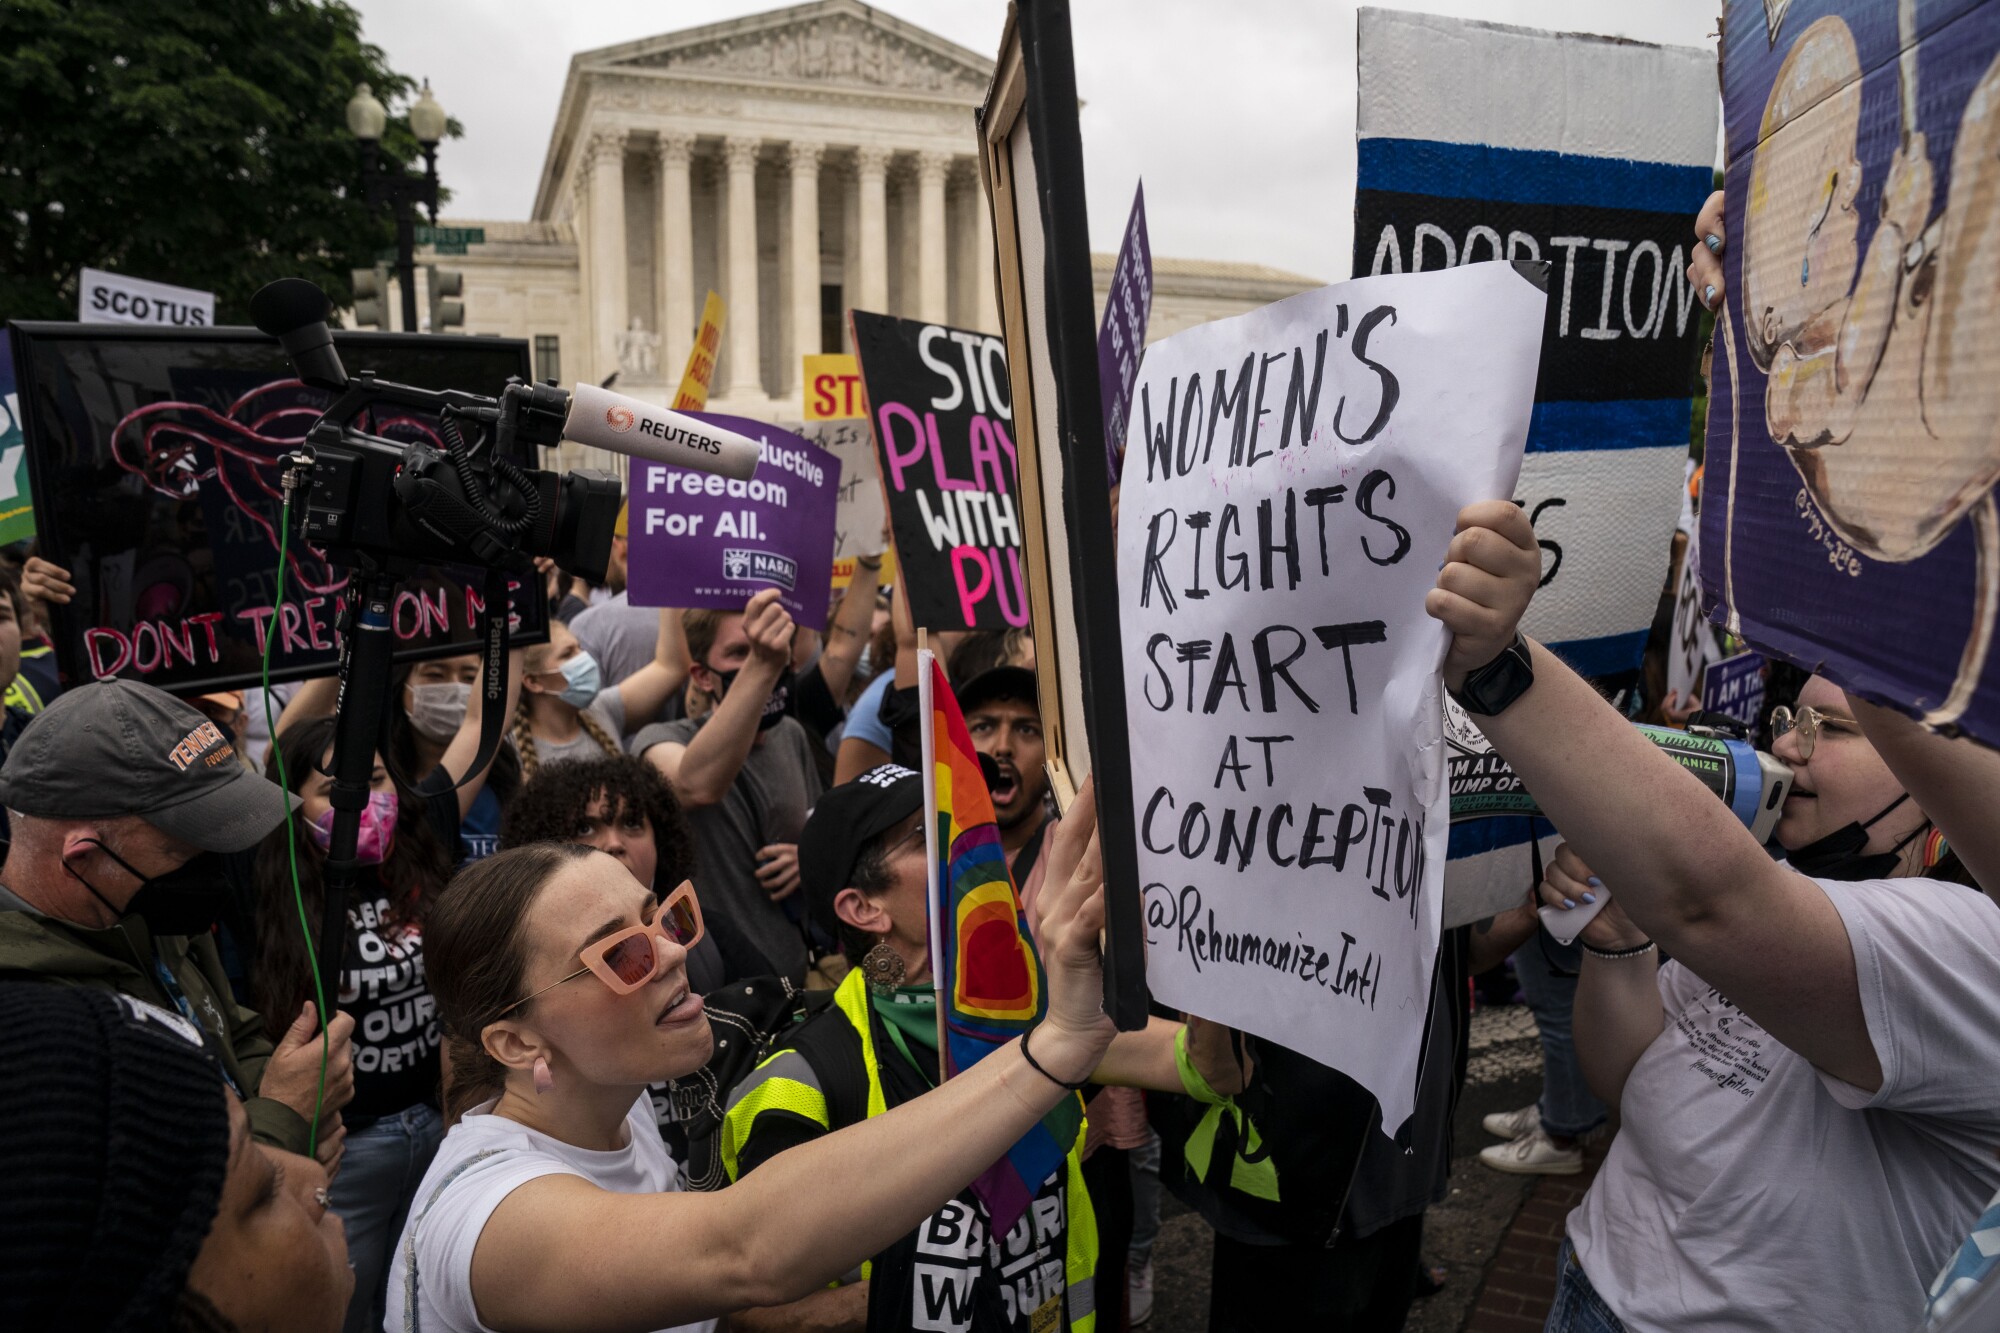 Abortion rights activists and anti-abortion activists challenge each other during a rally.